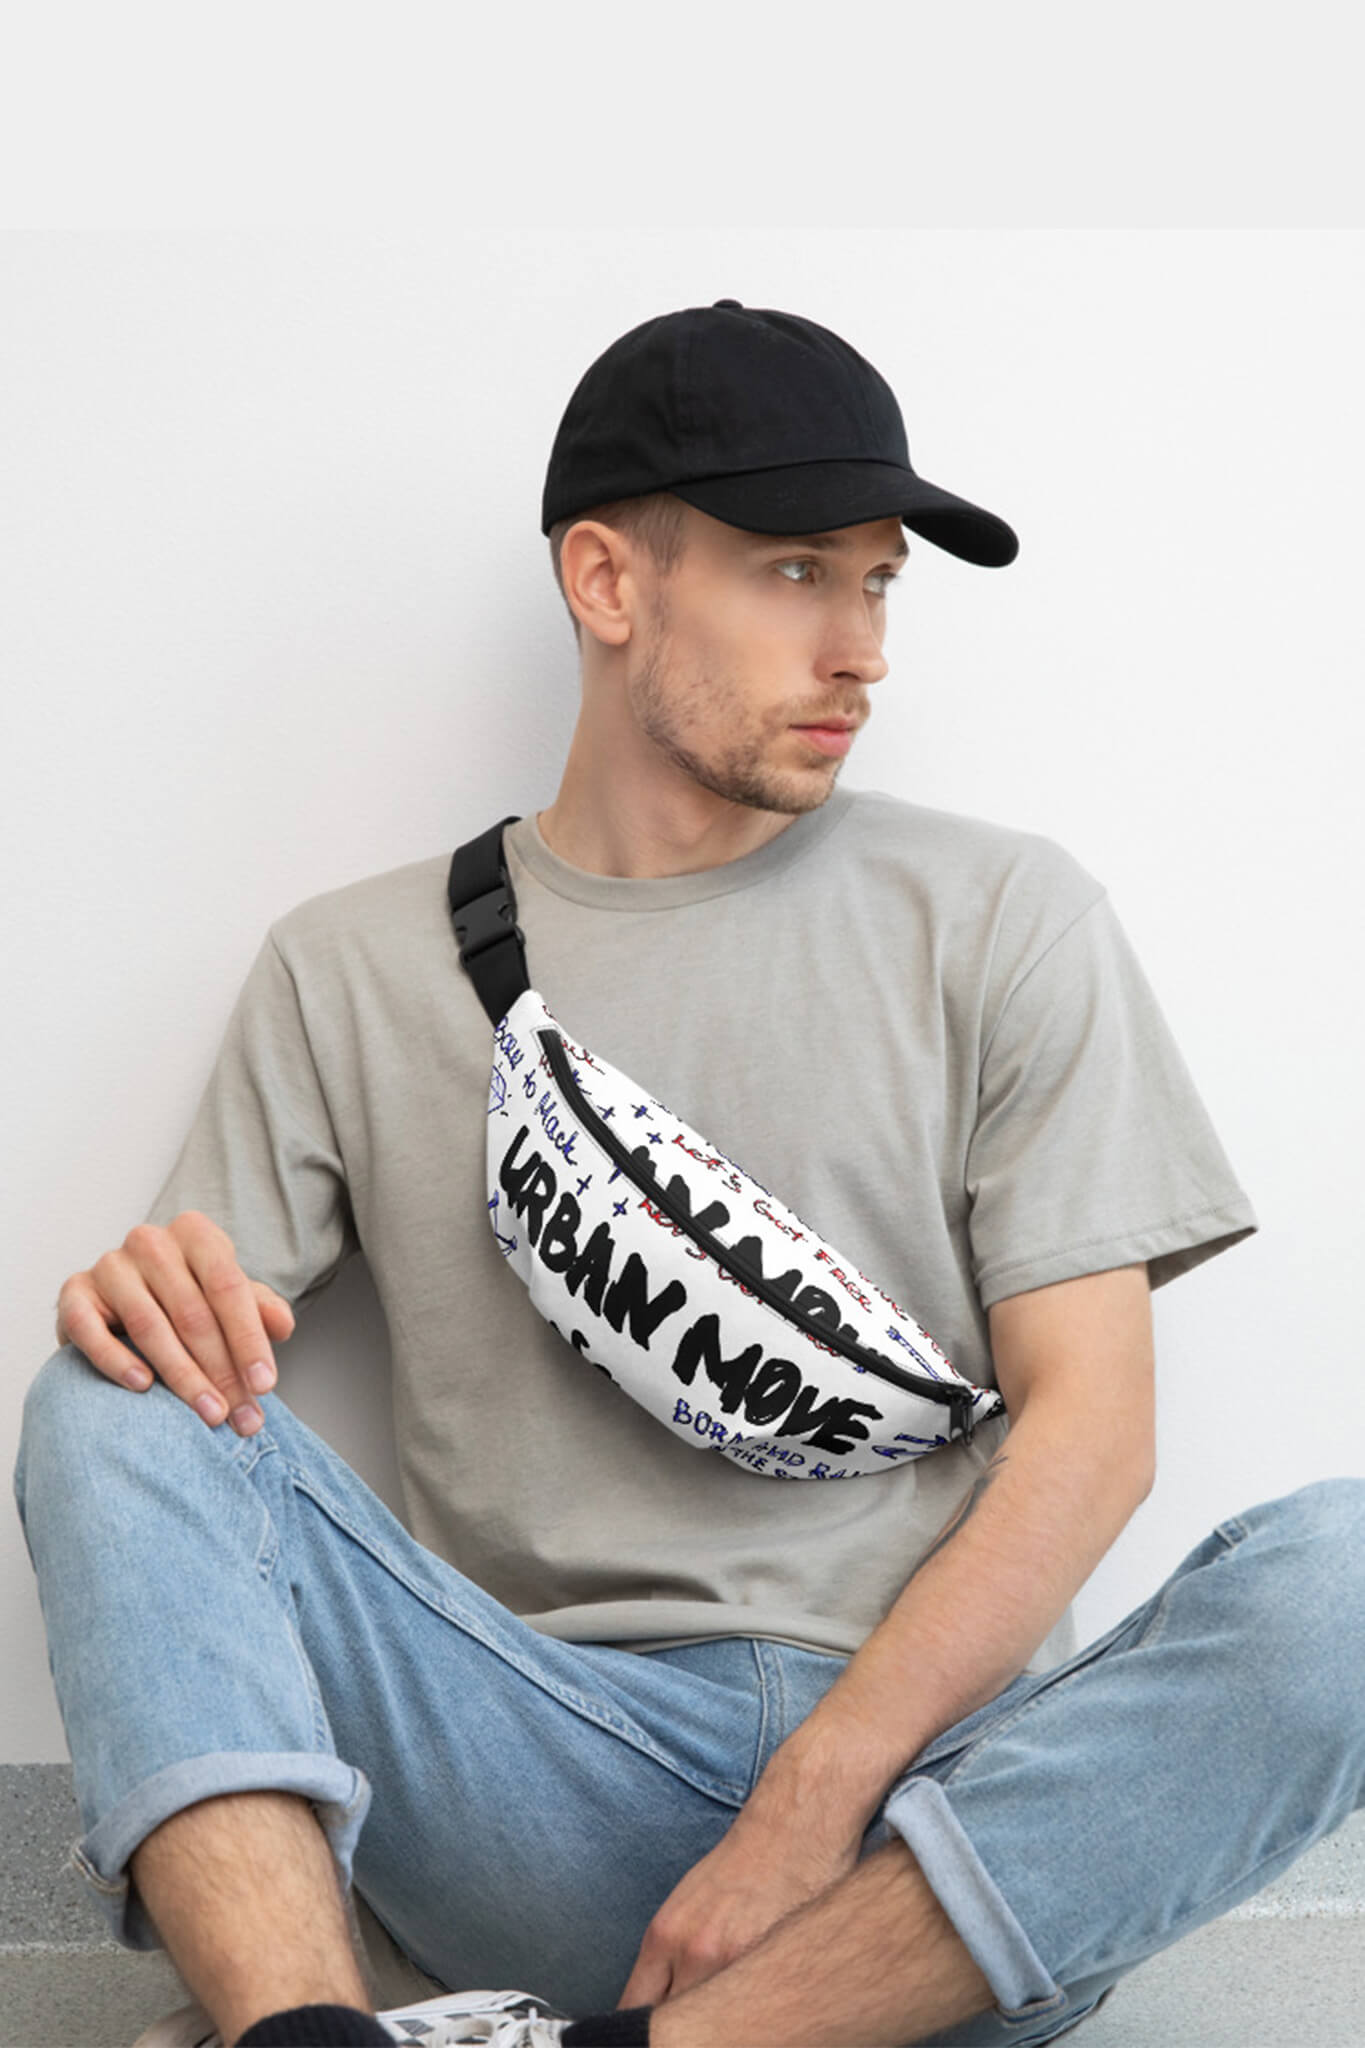 STATEMENT Fanny Pack